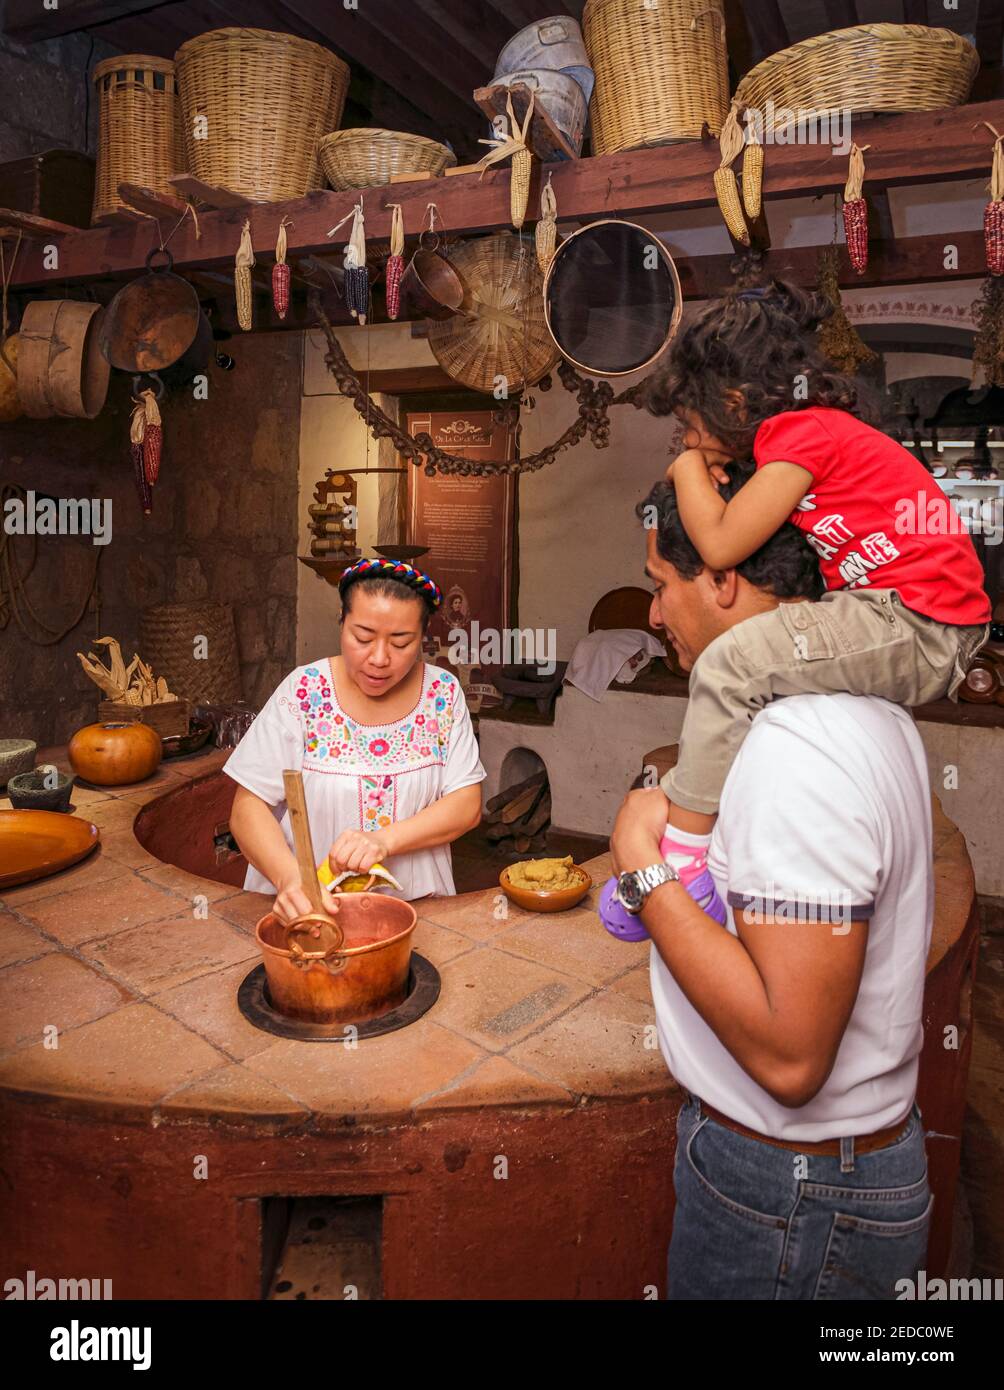 Demonstration of an artisan candy making process in the Candy Museum, or Museo de Dulces, in Morelia, Michoacan, Mexico. Stock Photo